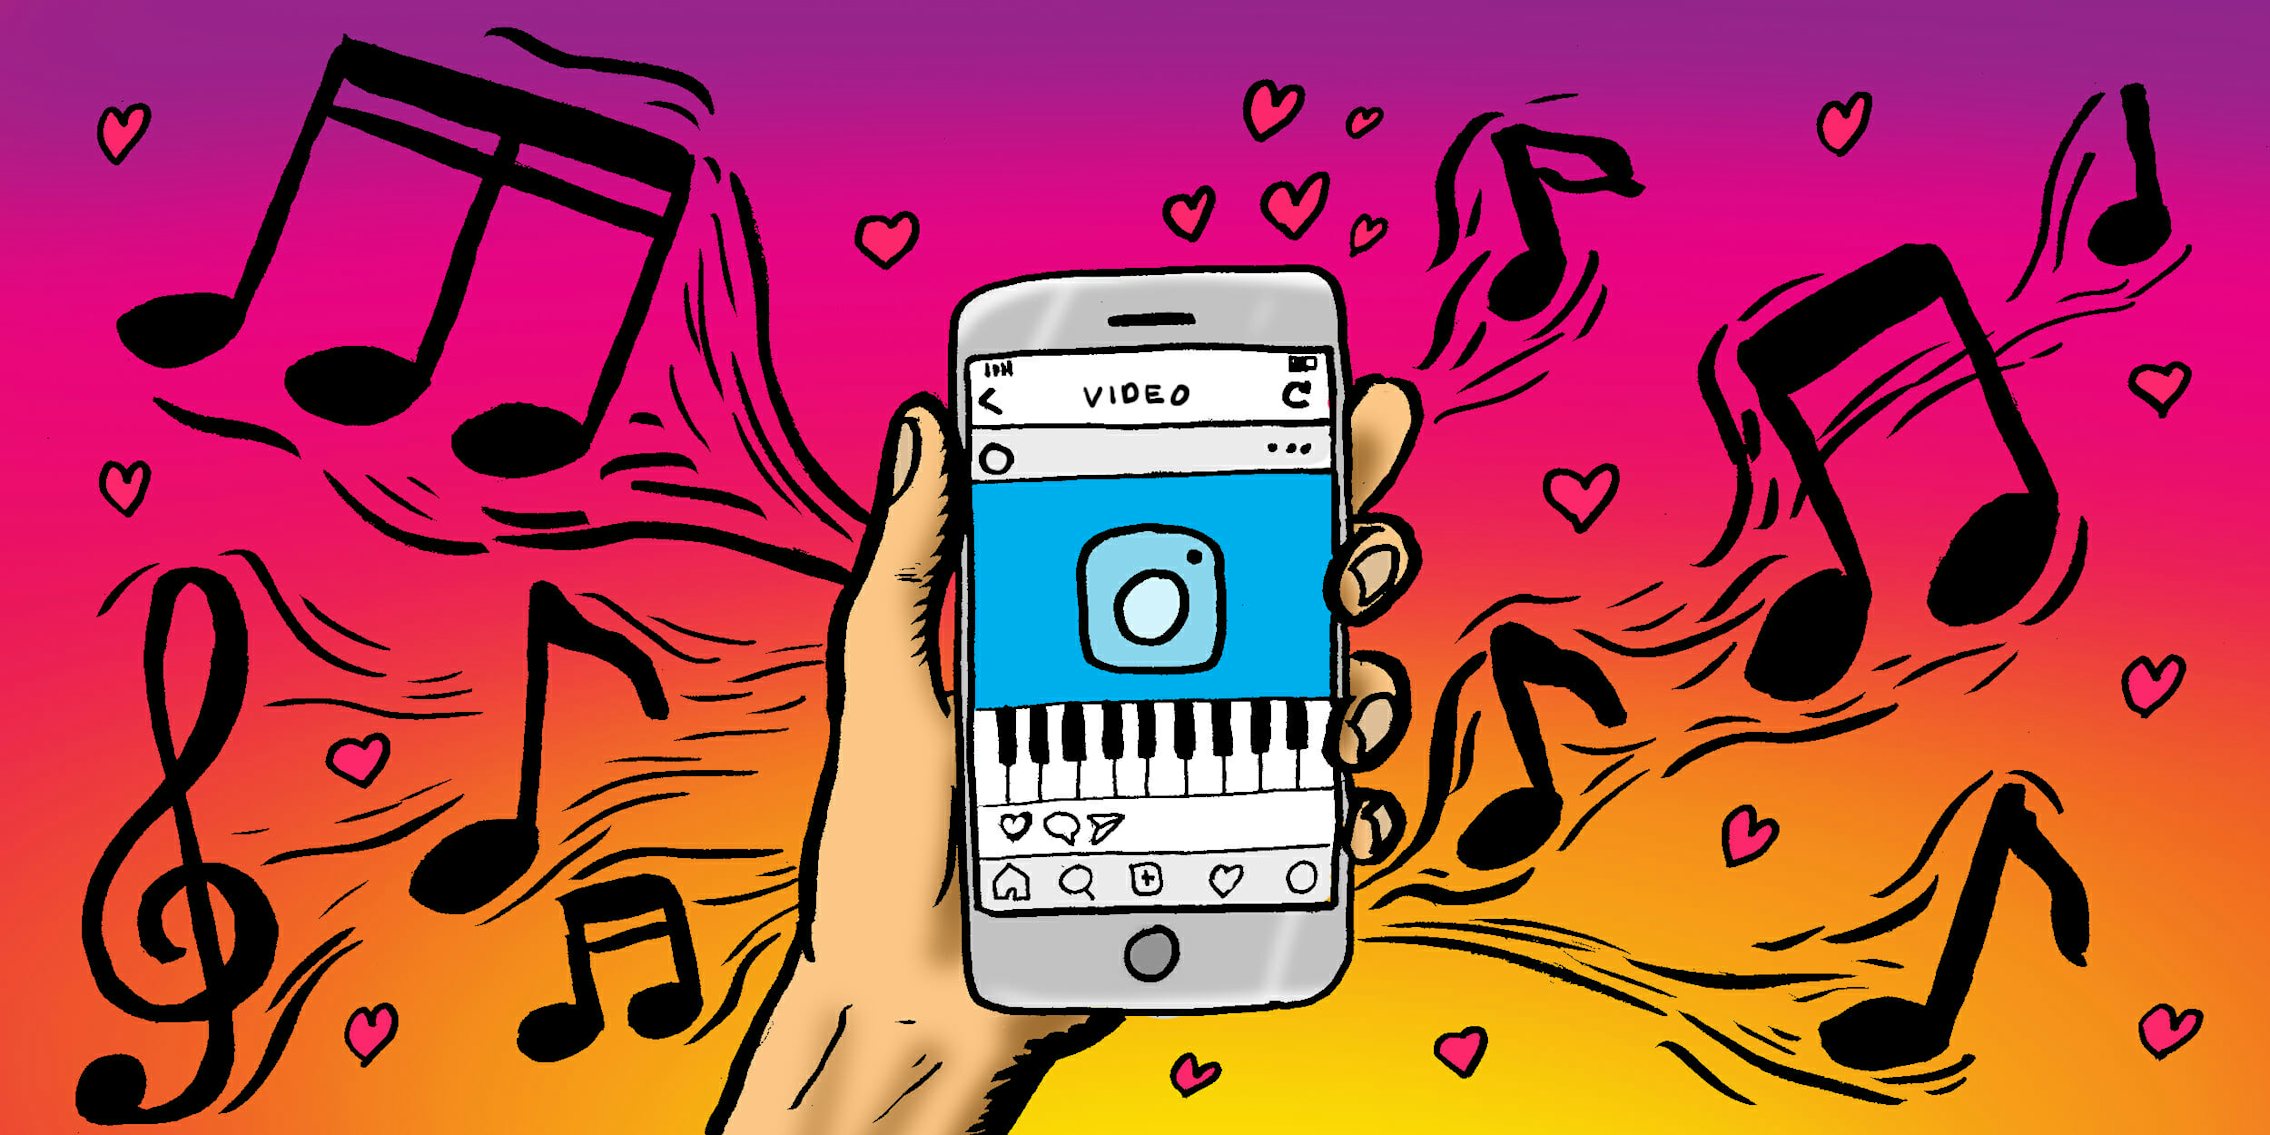 how to add music to instagram videos